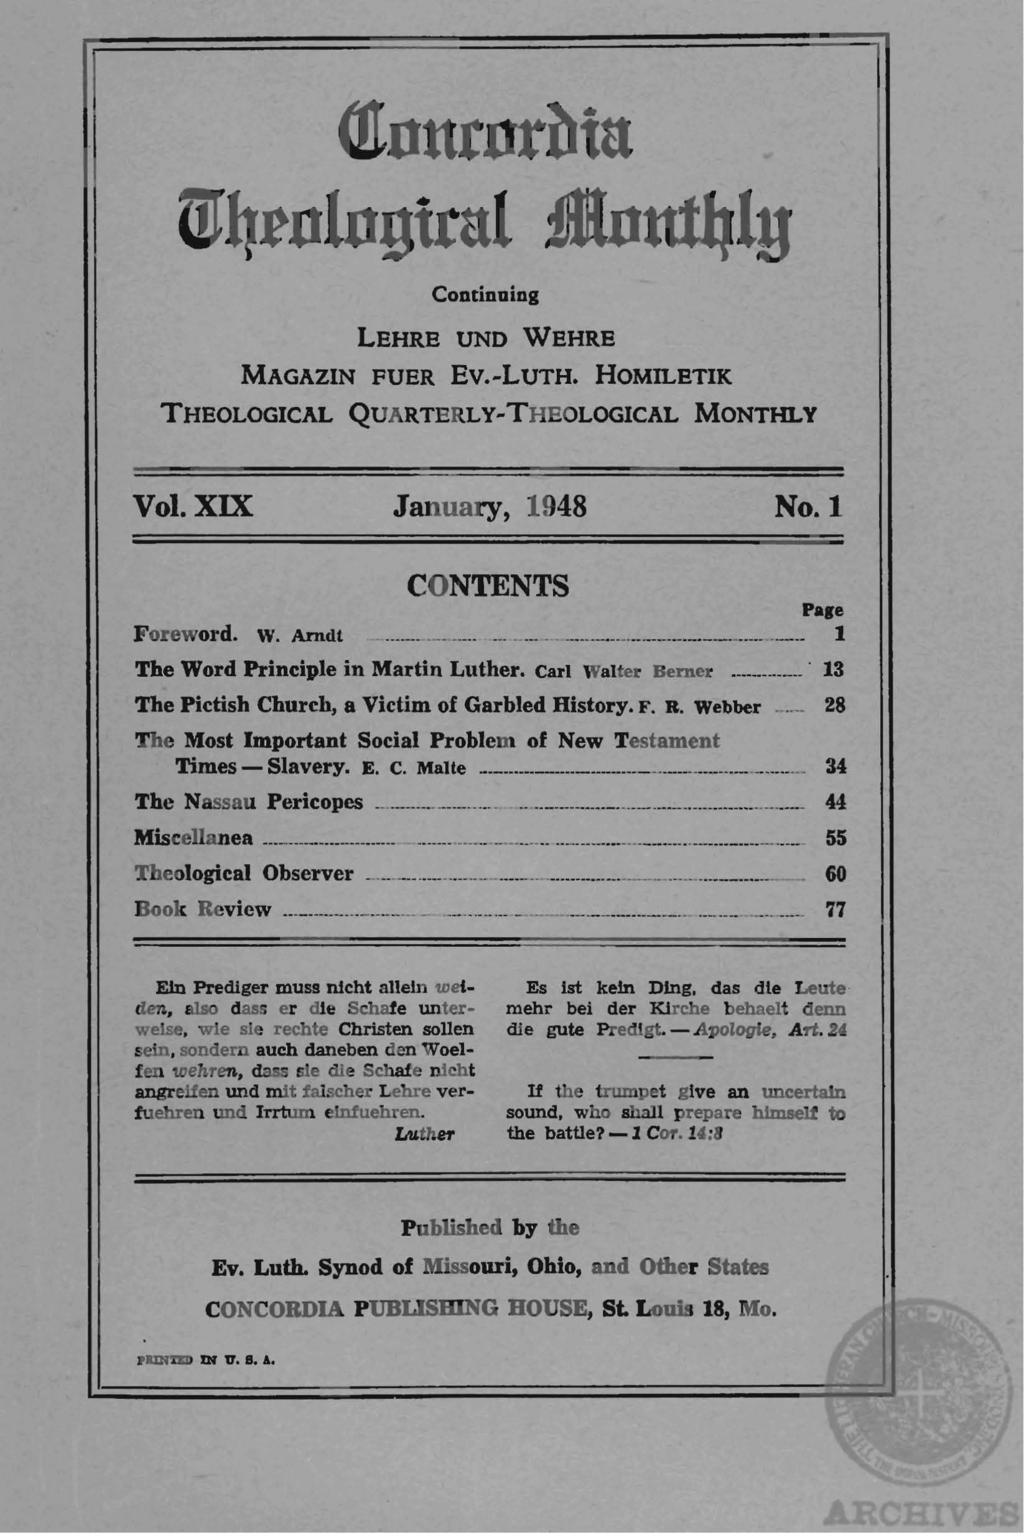 Qtnurnr~tu IDqrulngtrul :!Inutl}ly Continuing LEHRE UNO VVEHRE MAGAZIN FUER Ev.-LuTH. HOMILETIK THEOLOGICAL QUARTERLy-THEOLOGICAL MONTHLY Vol. XIX January, 1948 No.1 CONTENTS Pale Foreword. W. Arndt.